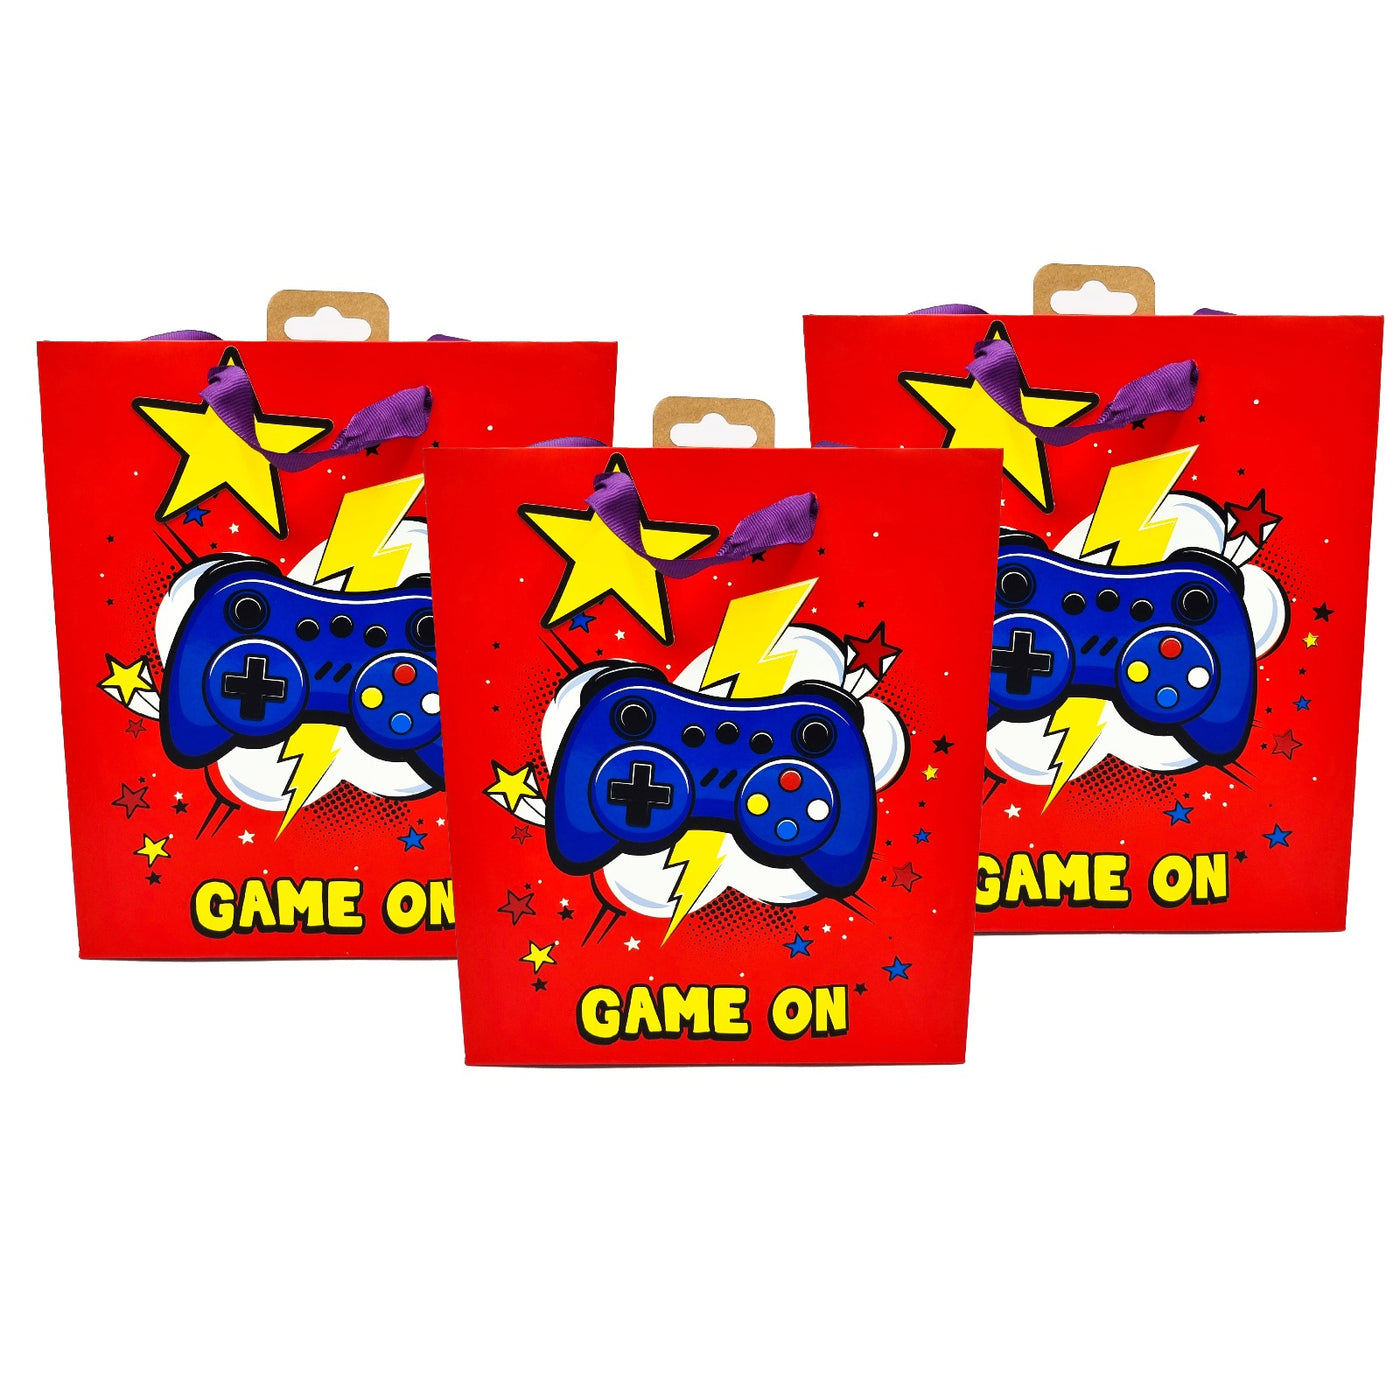 Pre Filled Birthday Gamer Party Goody Bags With Toys And Sweets For Boys And Girls.